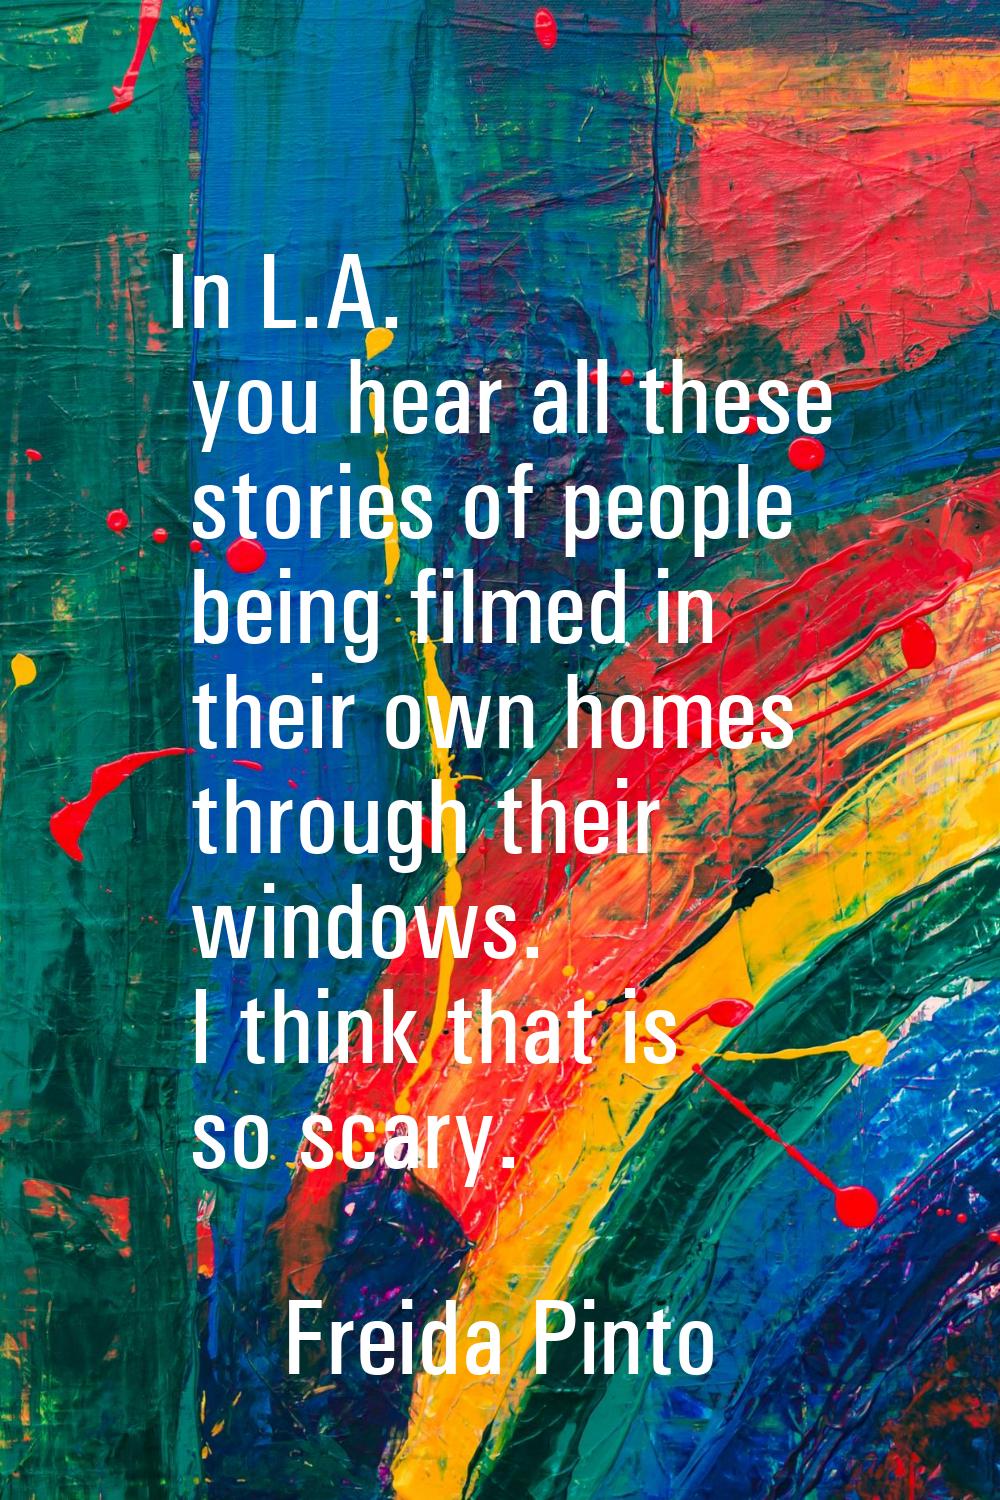 In L.A. you hear all these stories of people being filmed in their own homes through their windows.